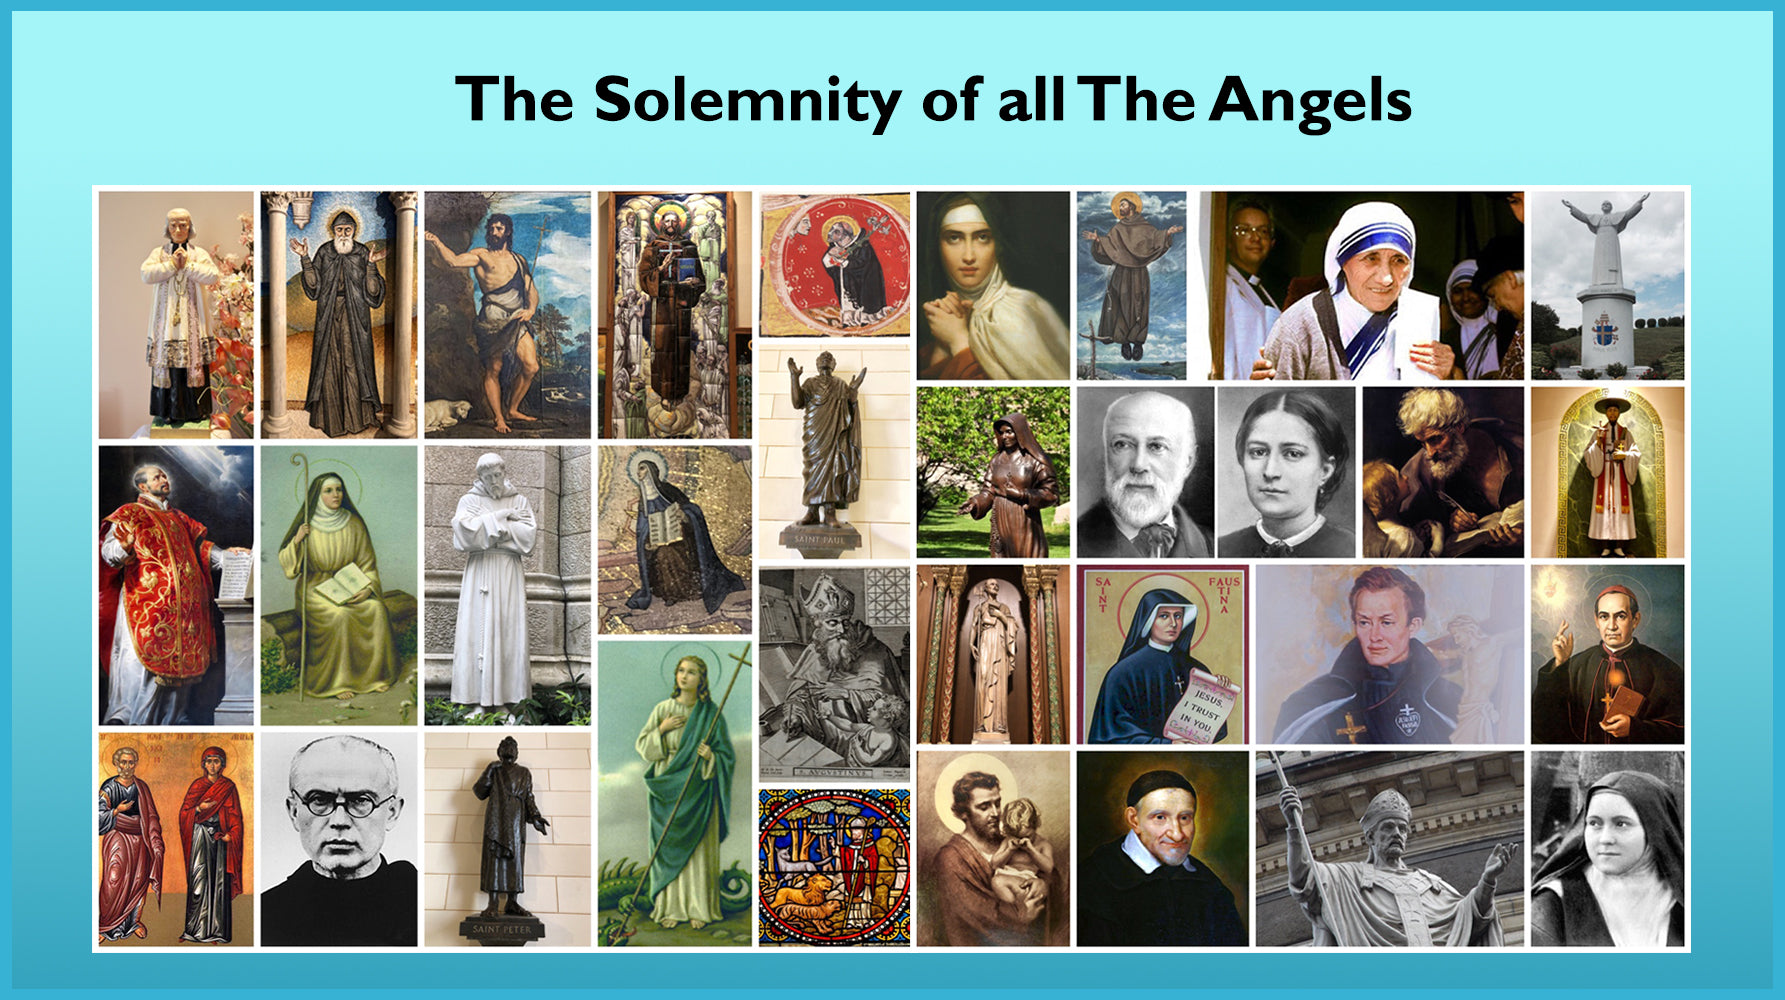 The Feast of The Solemnity of All Saints